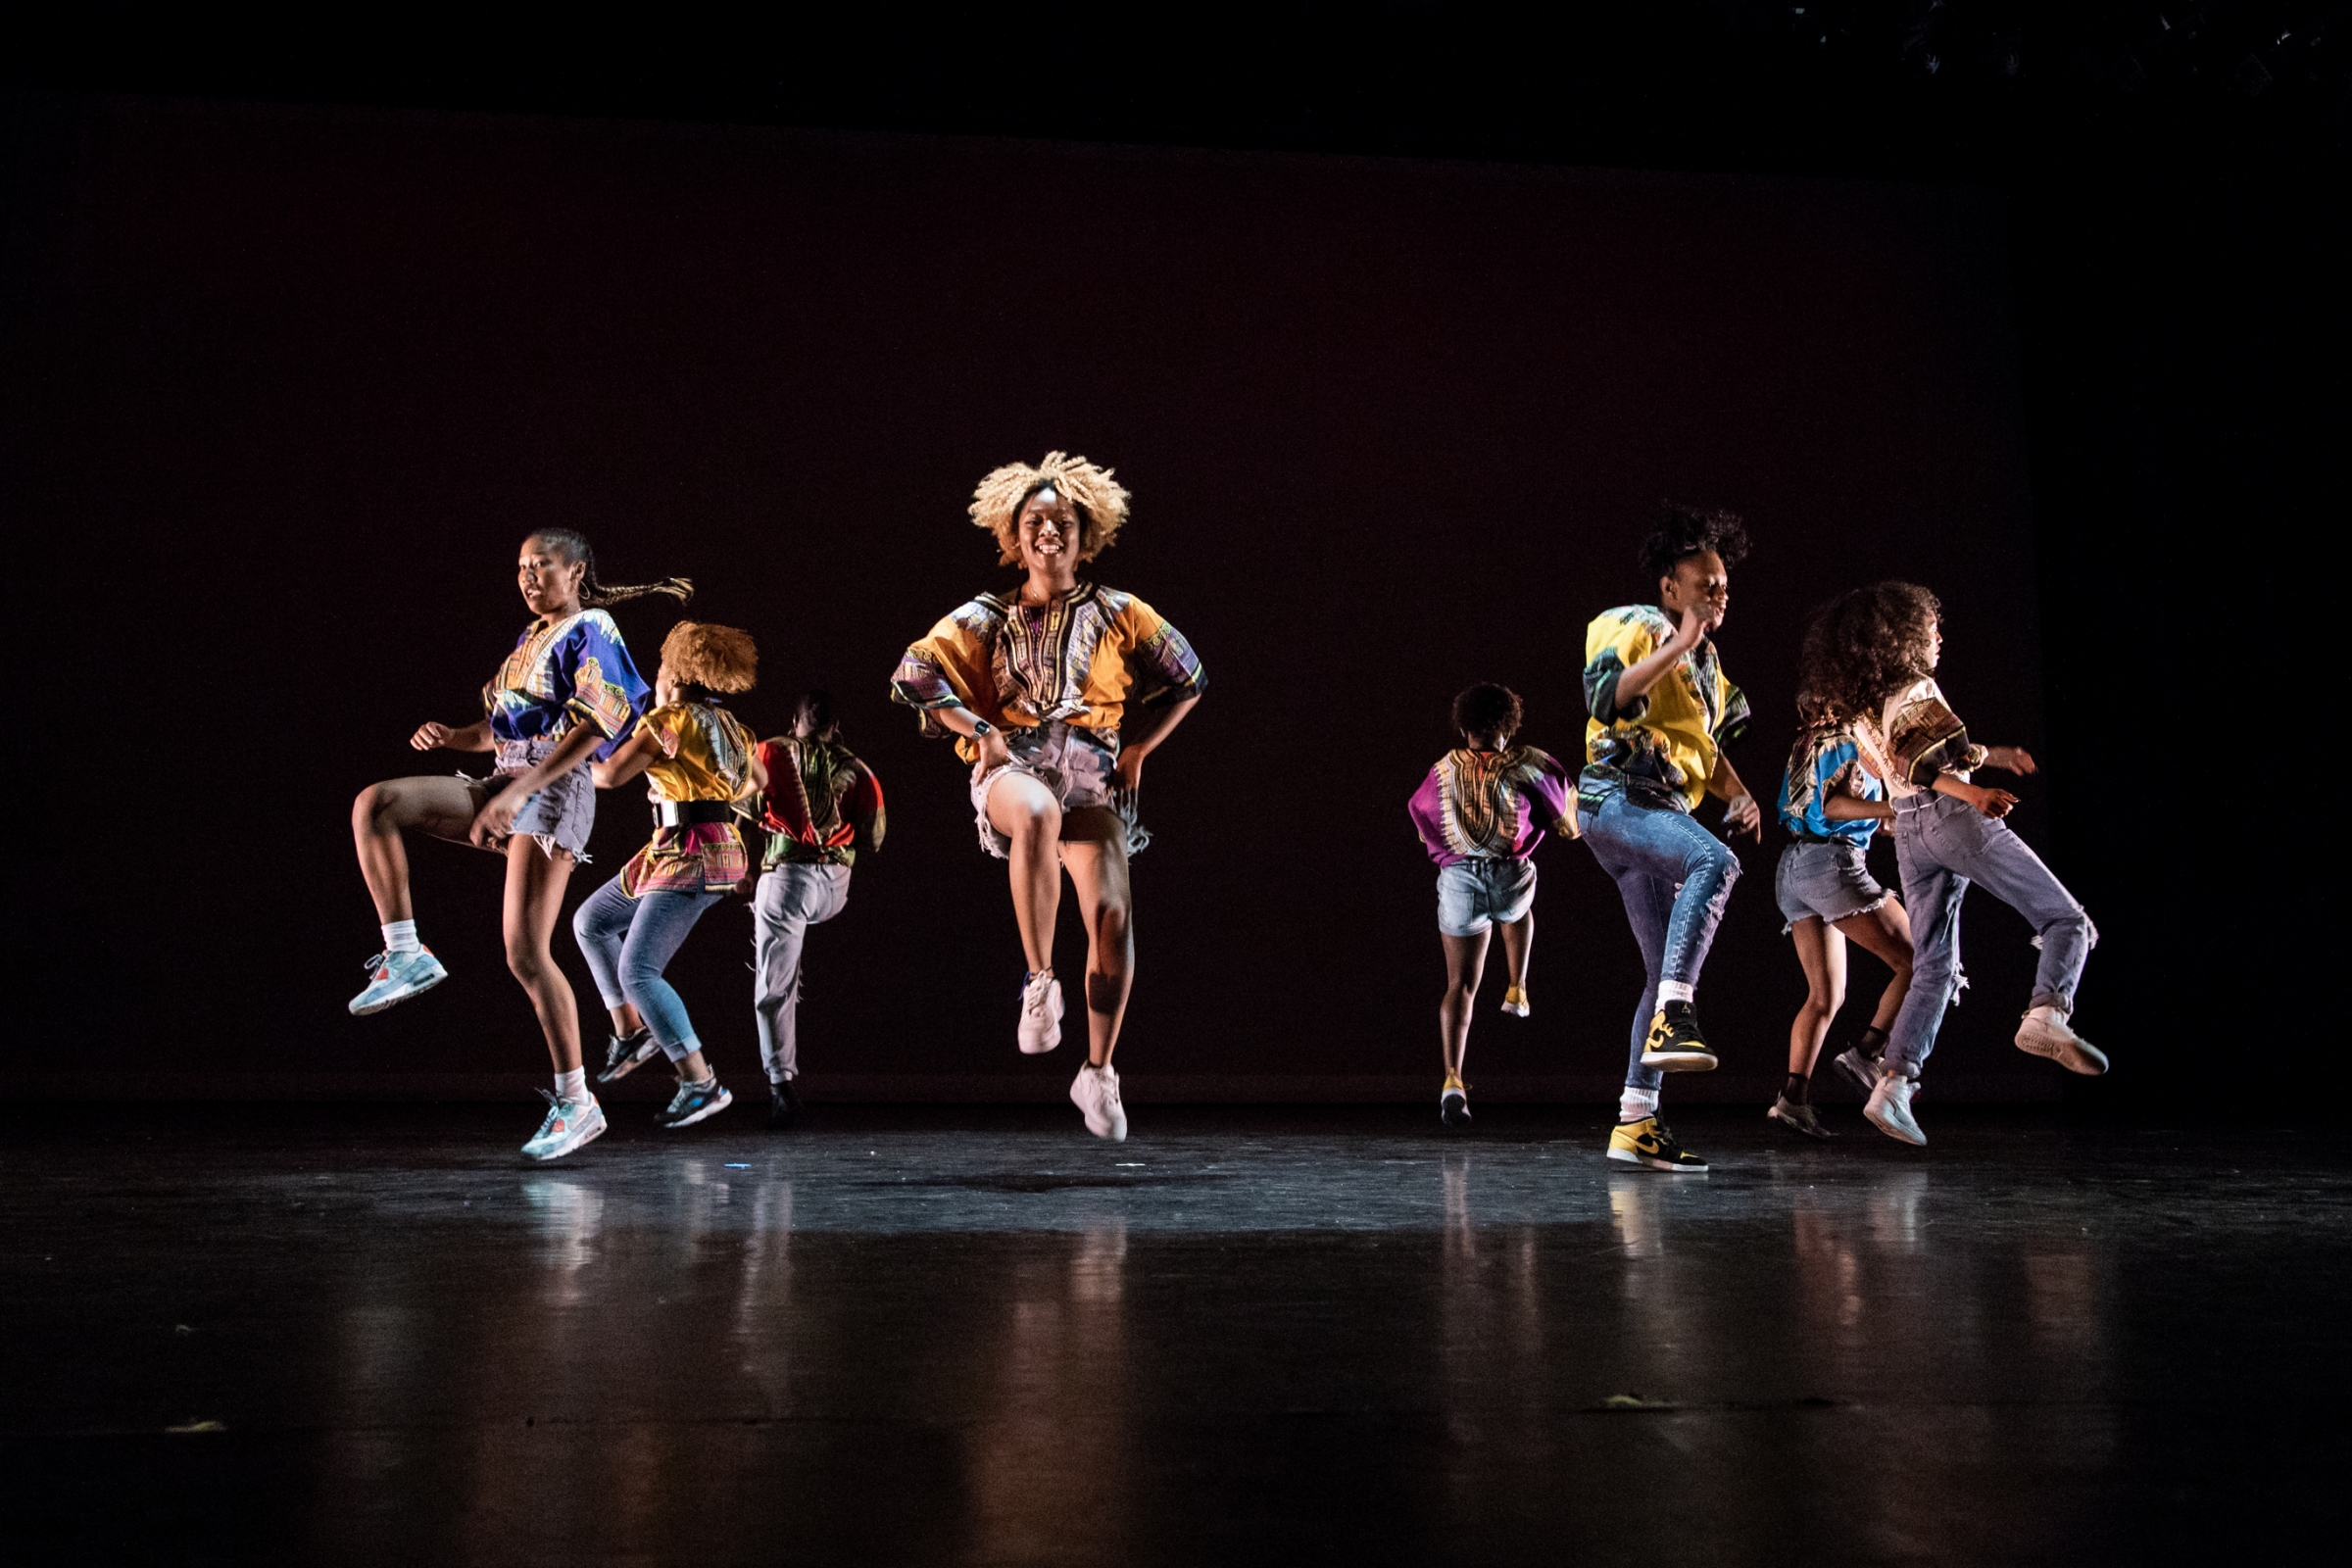 The women of LDC performing for the annual Ladies of Hip - Hop festival, wearing multi - color dashikis, faced outward, in a circle in front of a background